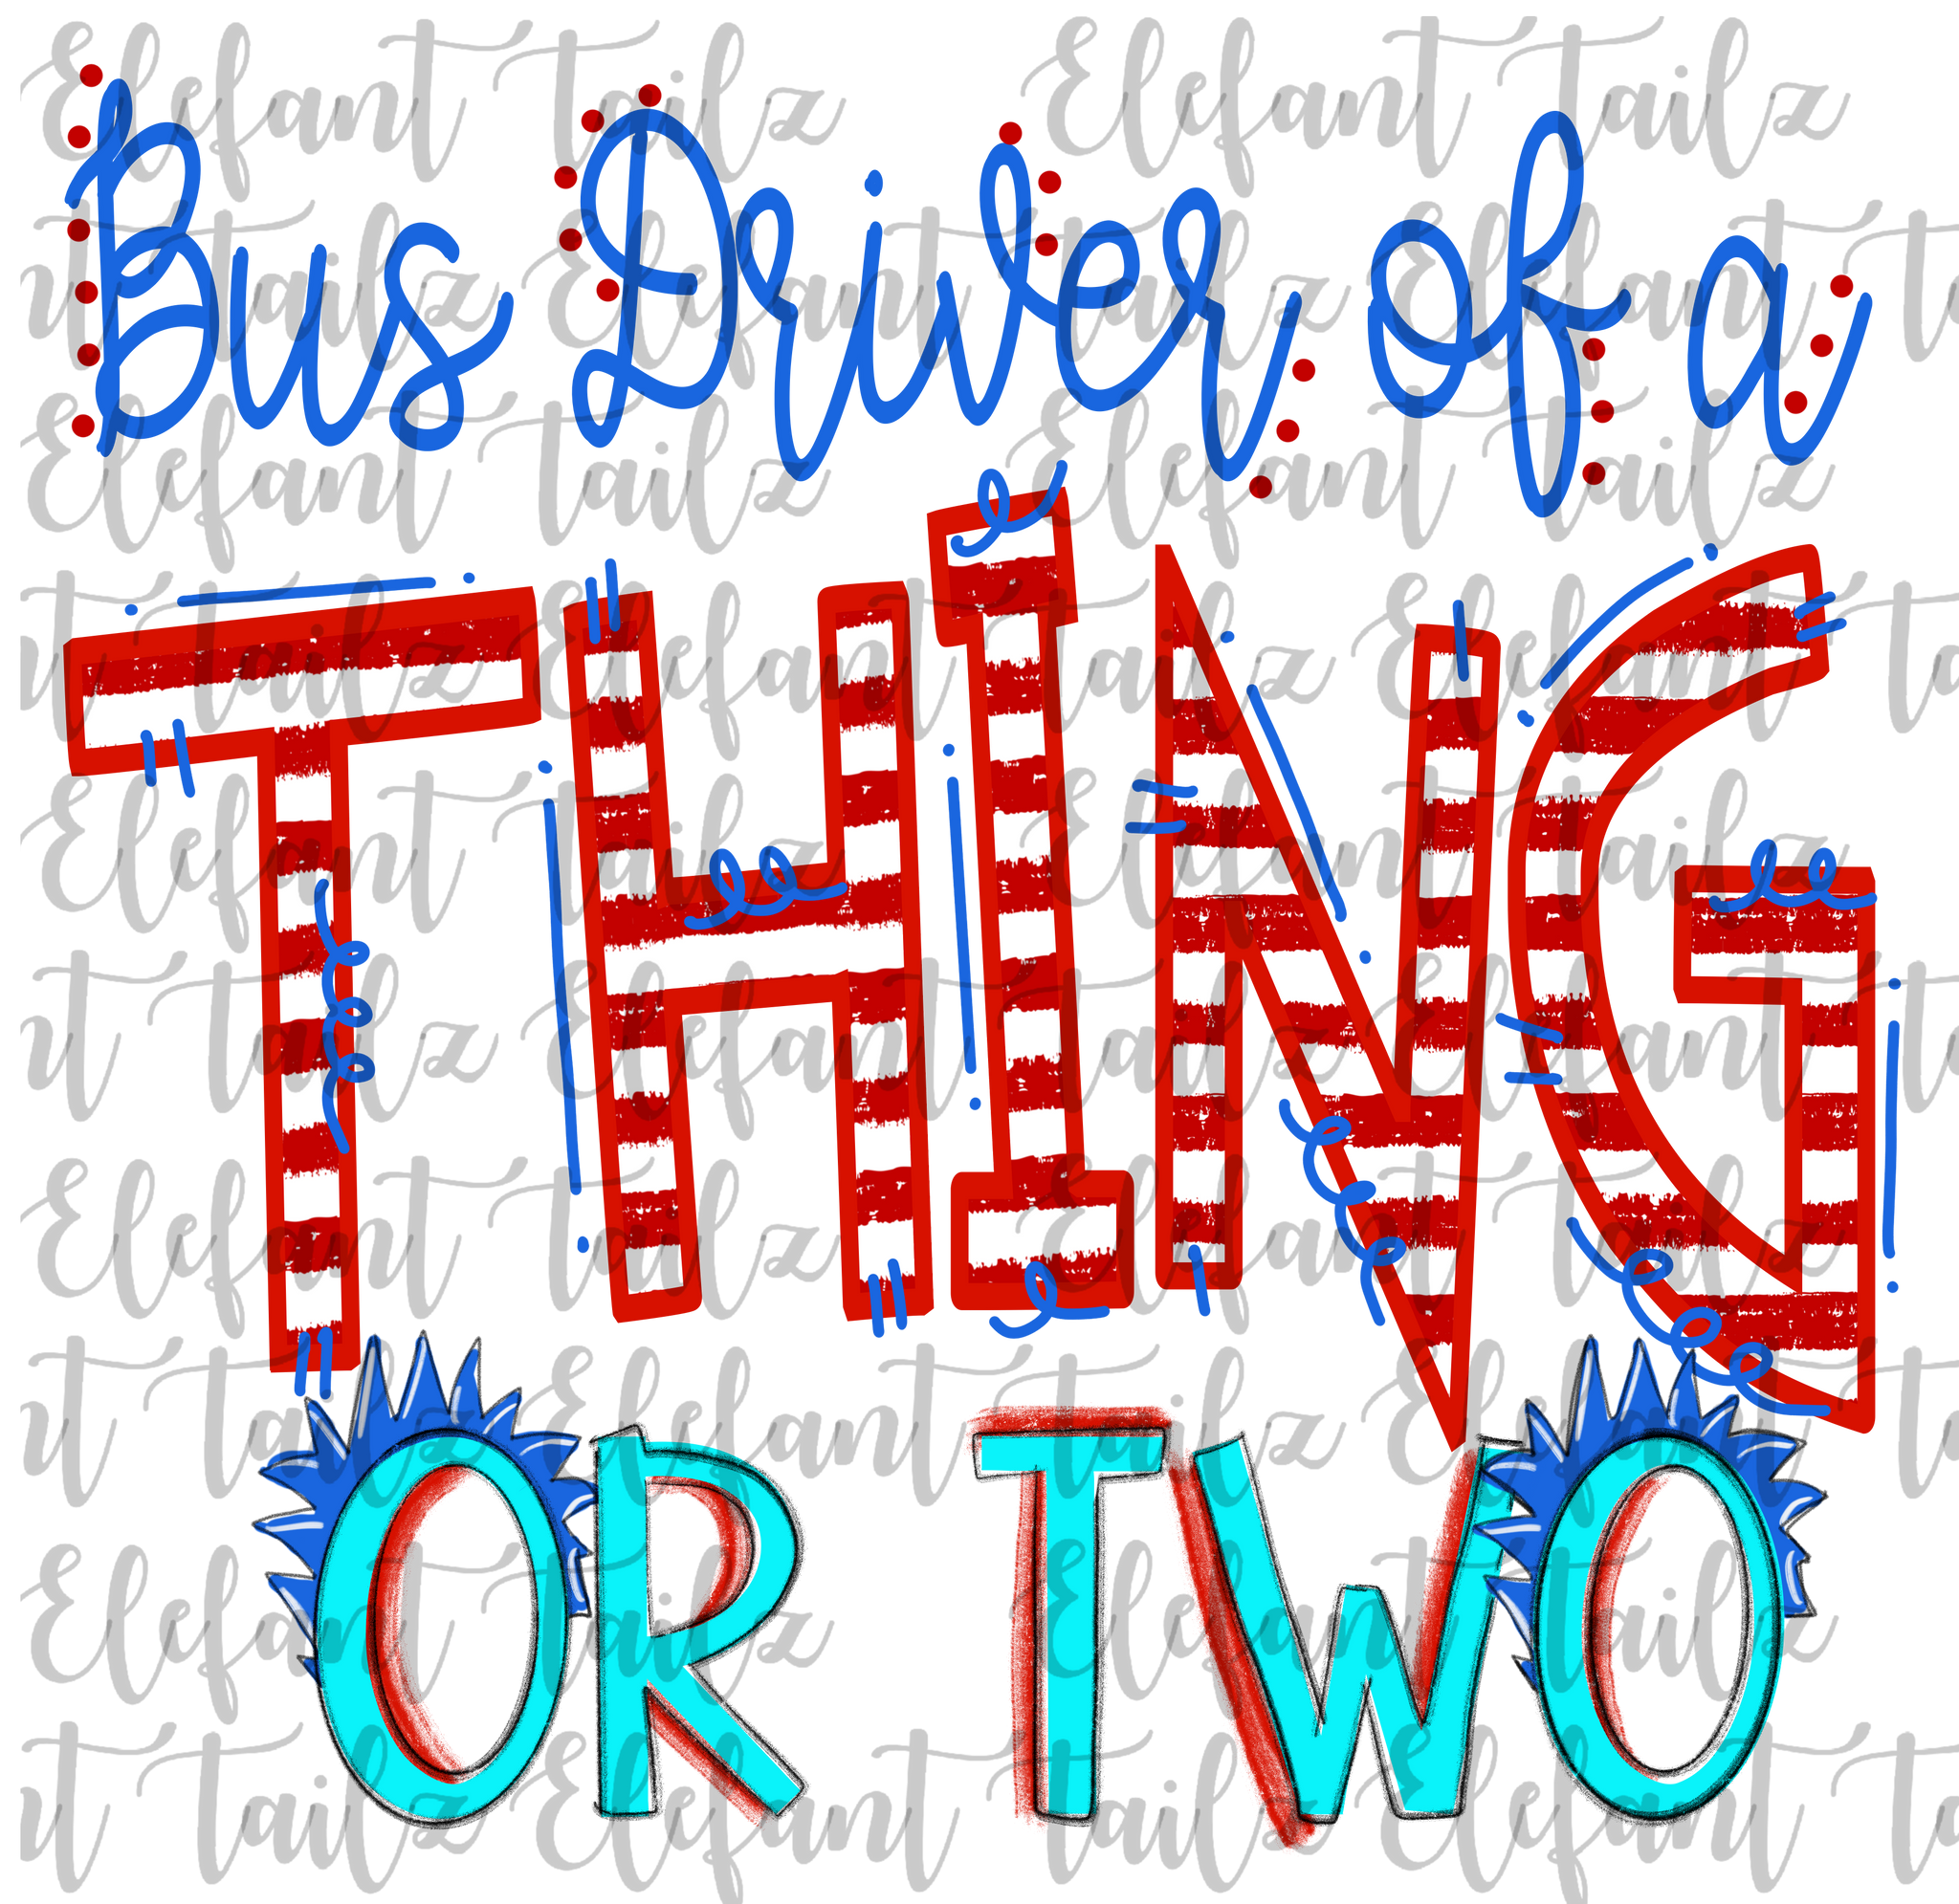 Bus Driver of a Thing or Two